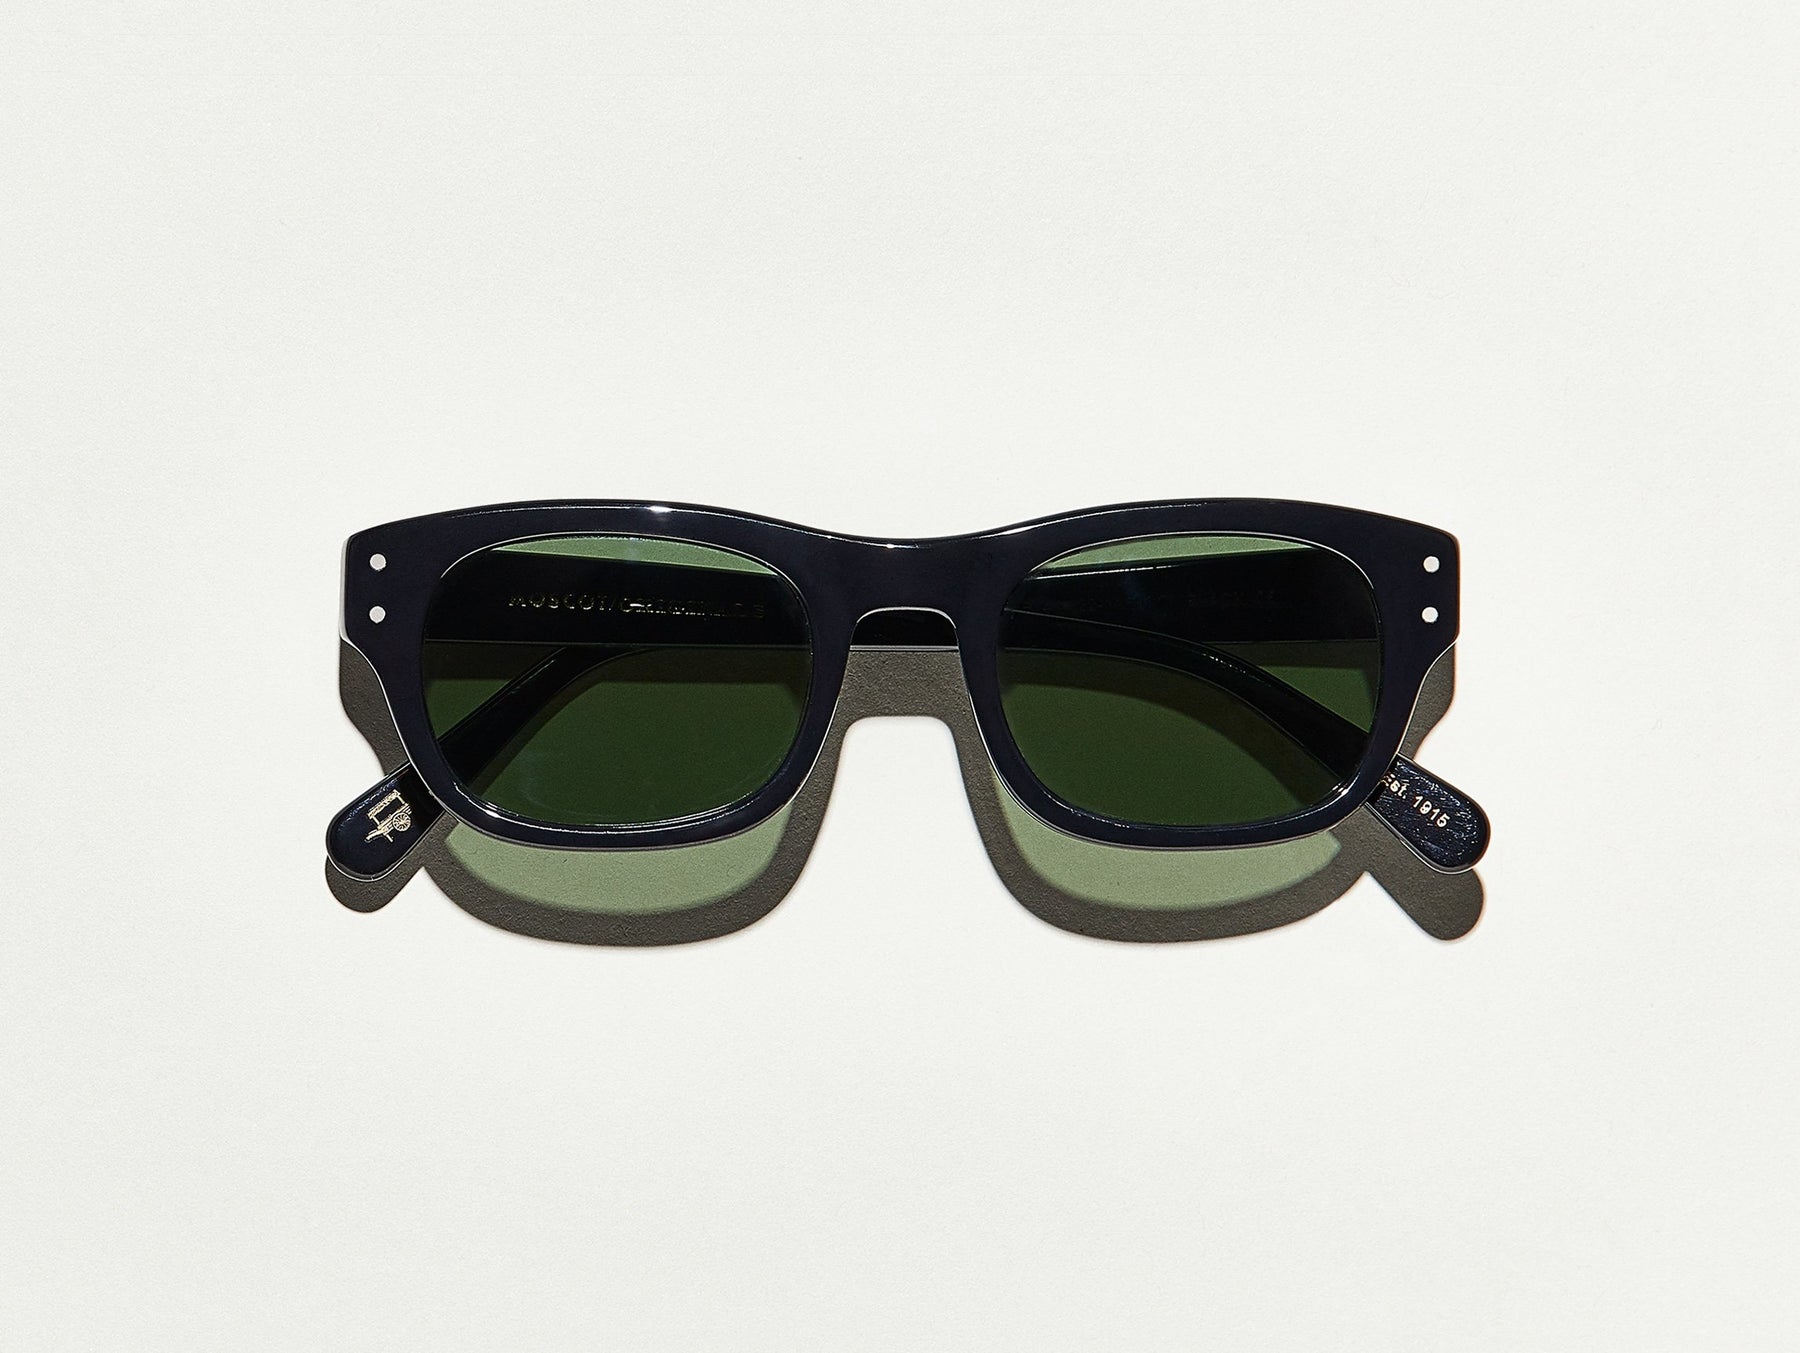 The NEBB SUN in Black with G-15 Glass Lenses